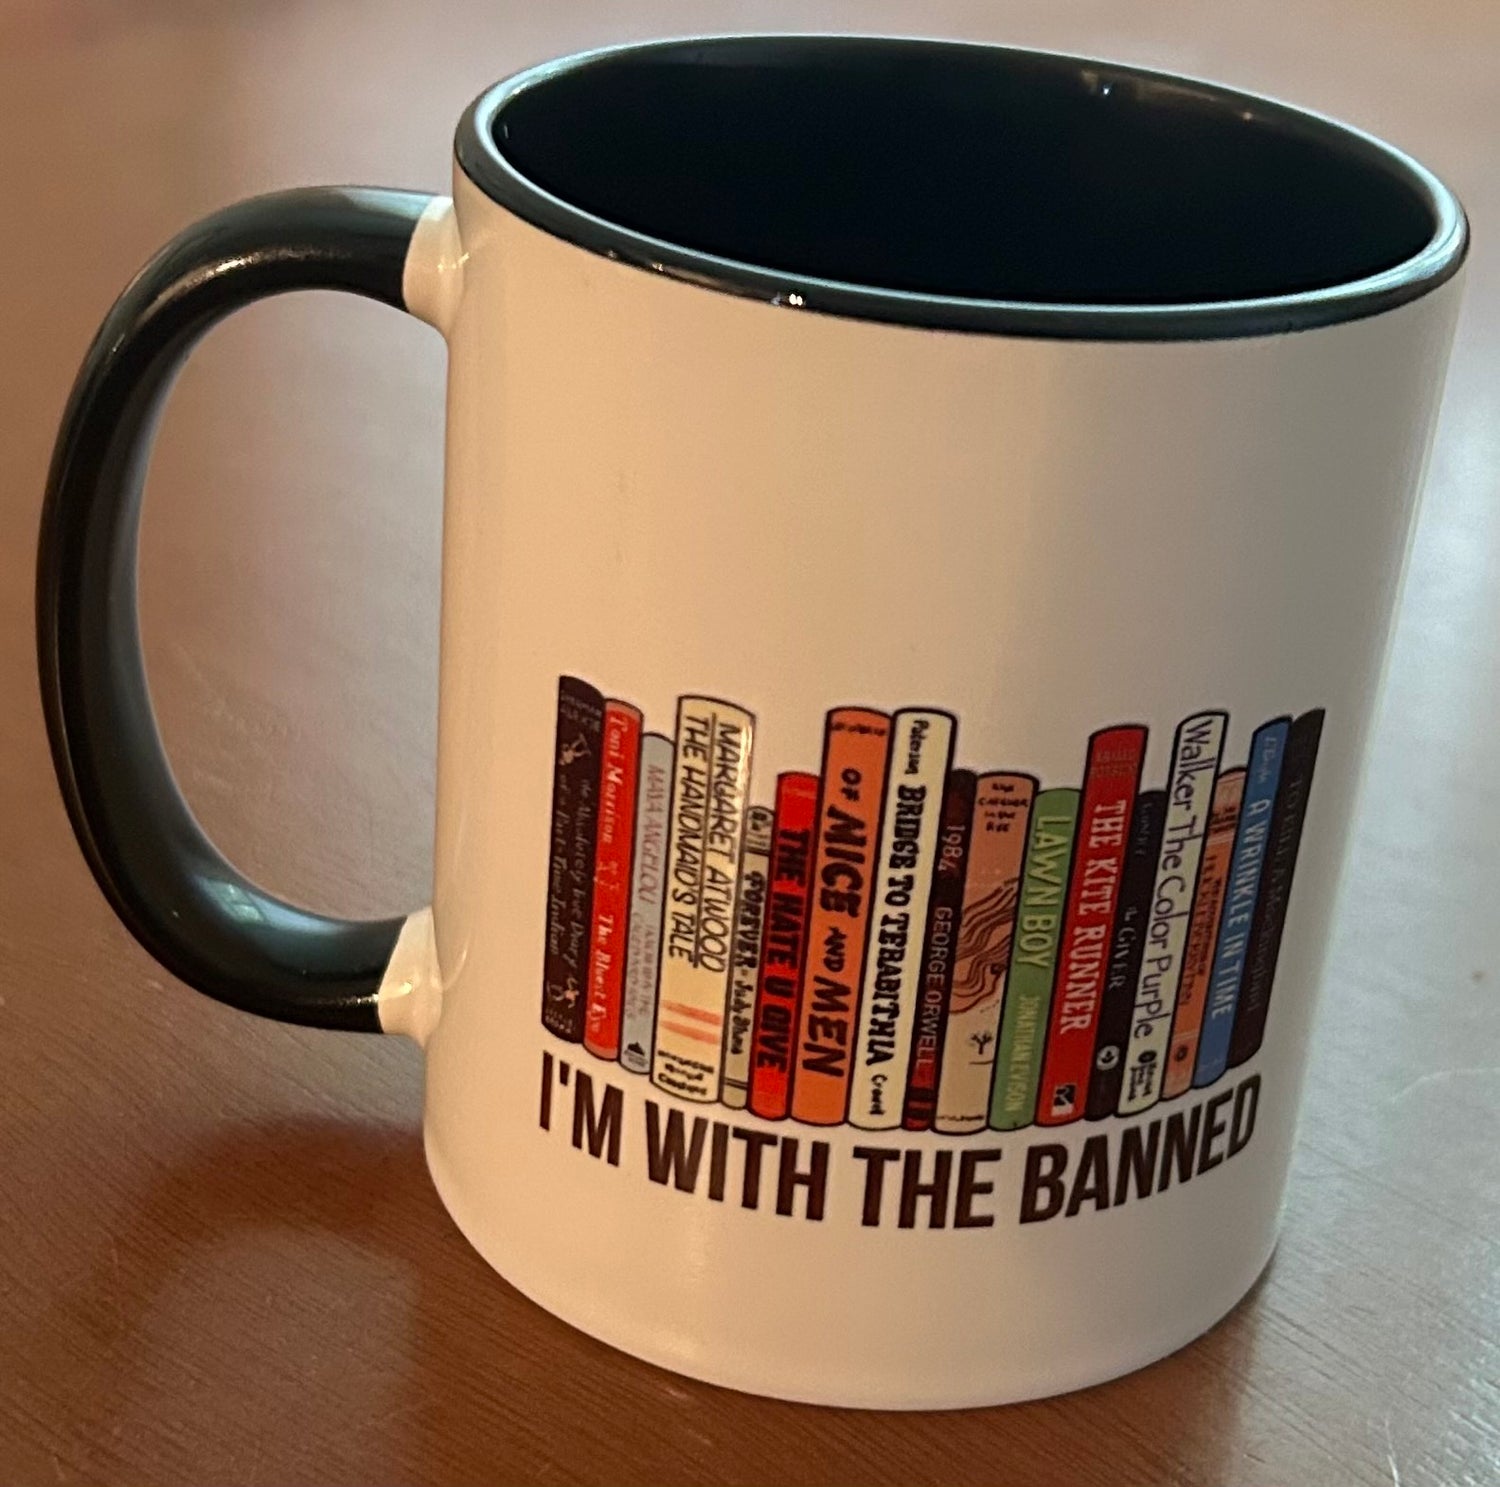 "I'm With The Banned" Coffee Mug with Black Handle